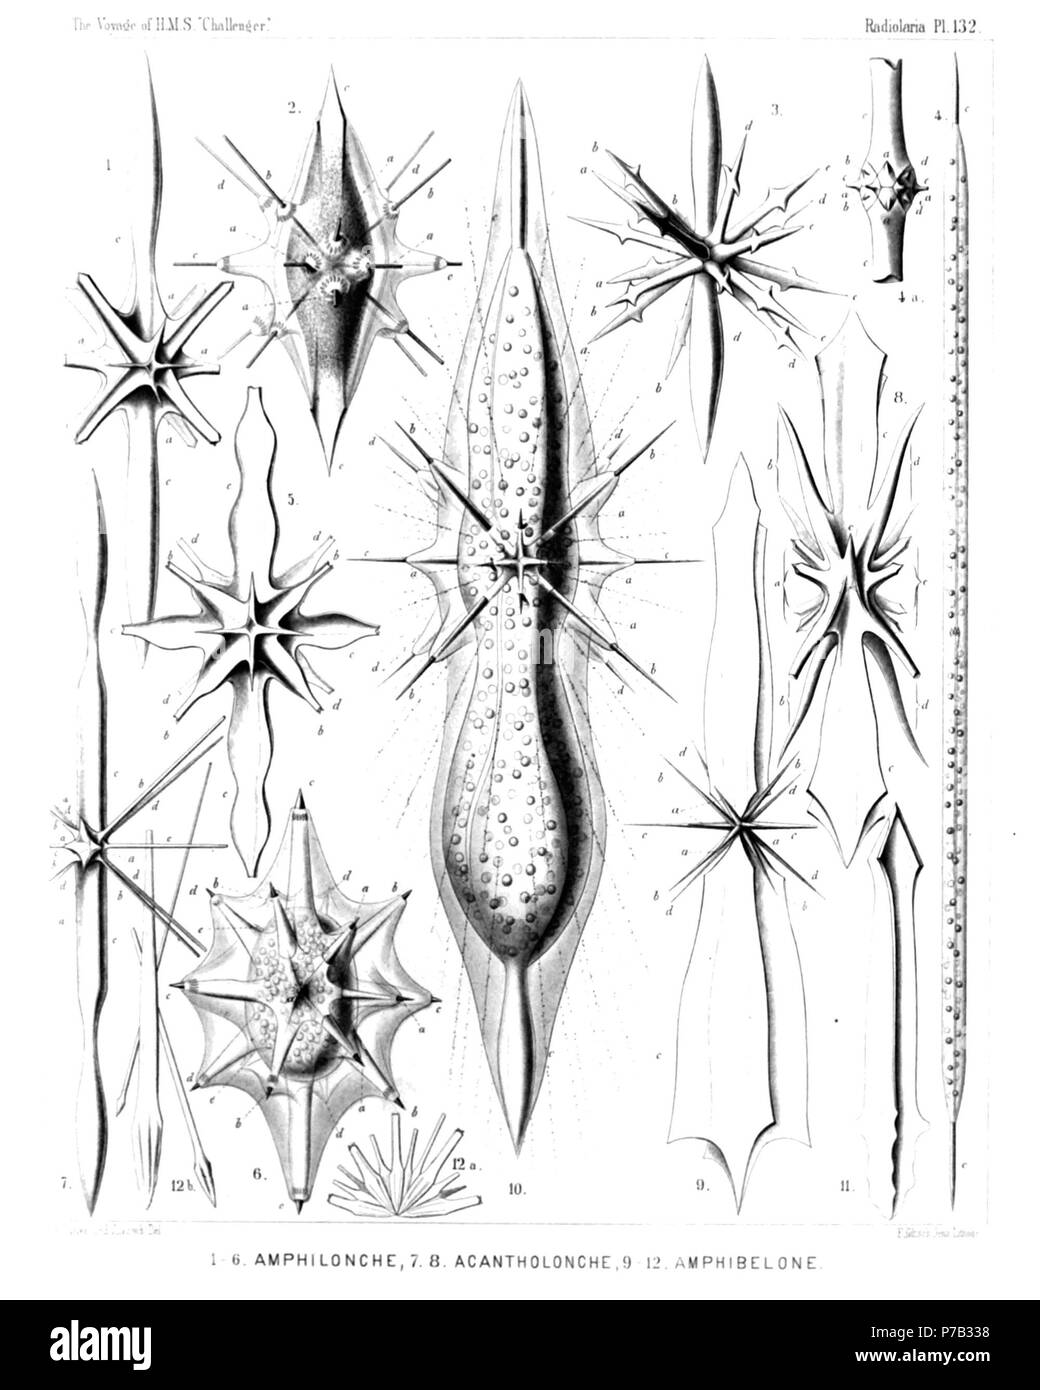 English: Illustration from Report on the Radiolaria collected by H.M.S. Challenger during the years 1873-1876. Part III. Original description follows:  Plate 132. Astrolophida, Astrolonchida et Amphilonchida.  Diam.  Fig. 1. Amphilonche lanceolata, n. sp., × 300  Fig. 2. Amphilonche hydrotomica, n. sp., × 300  The spindle-shaped central capsule is filled up with small granules. The clear calymma forms conical sheaths for the spines, with myophriscs.  Fig. 3. Amphilonche diodon, n. sp., × 300  Fig. 4. Amphilonche concreta, n. sp., × 100  A complete specimen with the cylindrical central capsule. Stock Photo